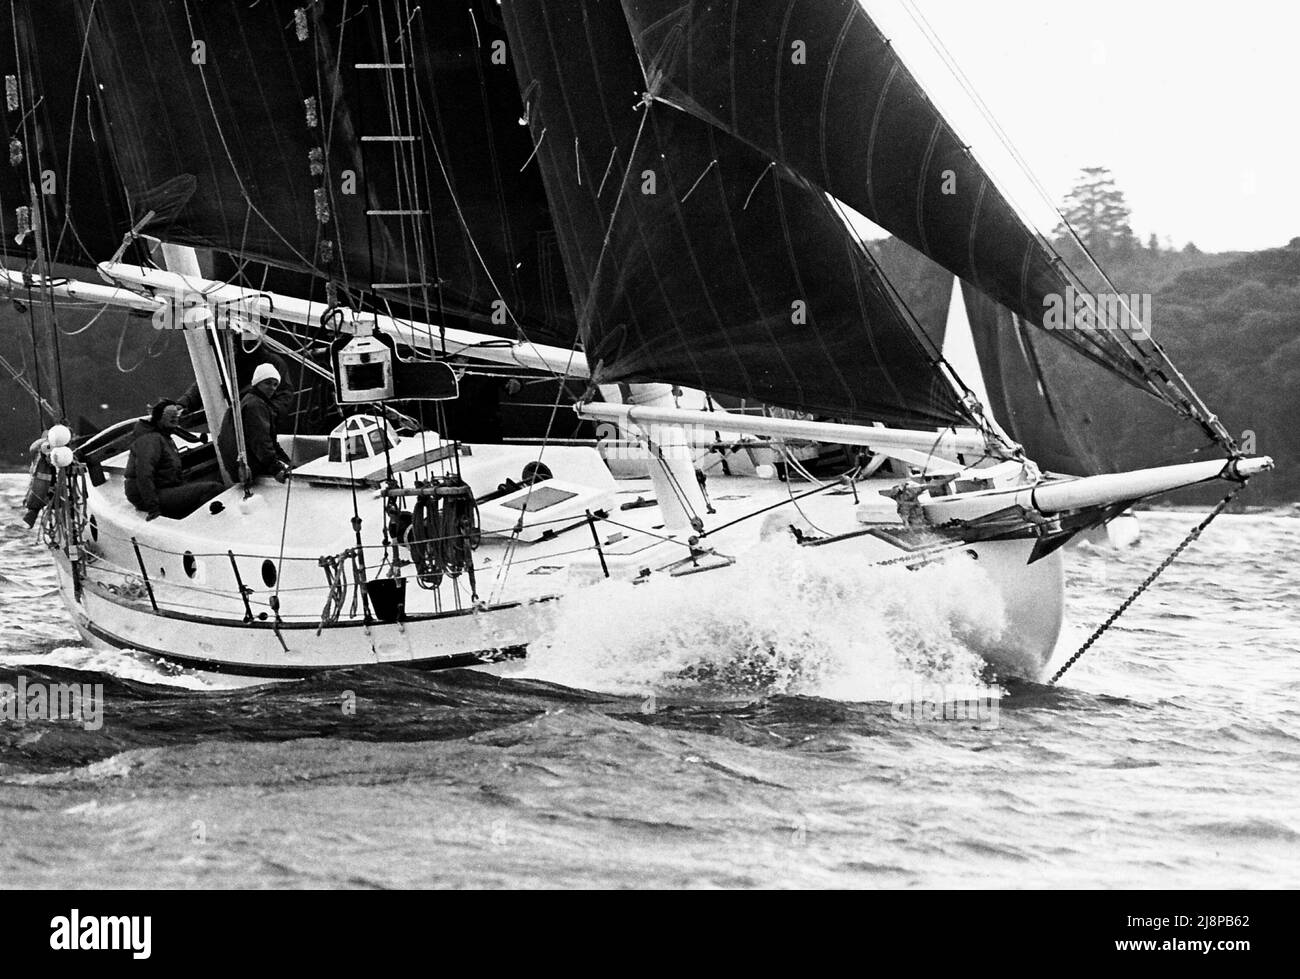 AJAXNETPHOTO. 16TH SEPTEMBER, 1977. SOLENT, ENGLAND. - OLD GAFFERS RACE - THE YACHT VENUS DESIGNED AND BUILT BY PAUL ERLING JOHNSON, IN HEAVY WEATHER DURING THE ANNUAL SOLENT CLASSIC RACE FOR GAFF RIGGED YACHTS. YACHT WAS LATER LOST OFF NORTH COAST OF AUSTRALIA.PHOTO:JONATHAN EASTLAND/AJAX REF:771609 56 Stock Photo